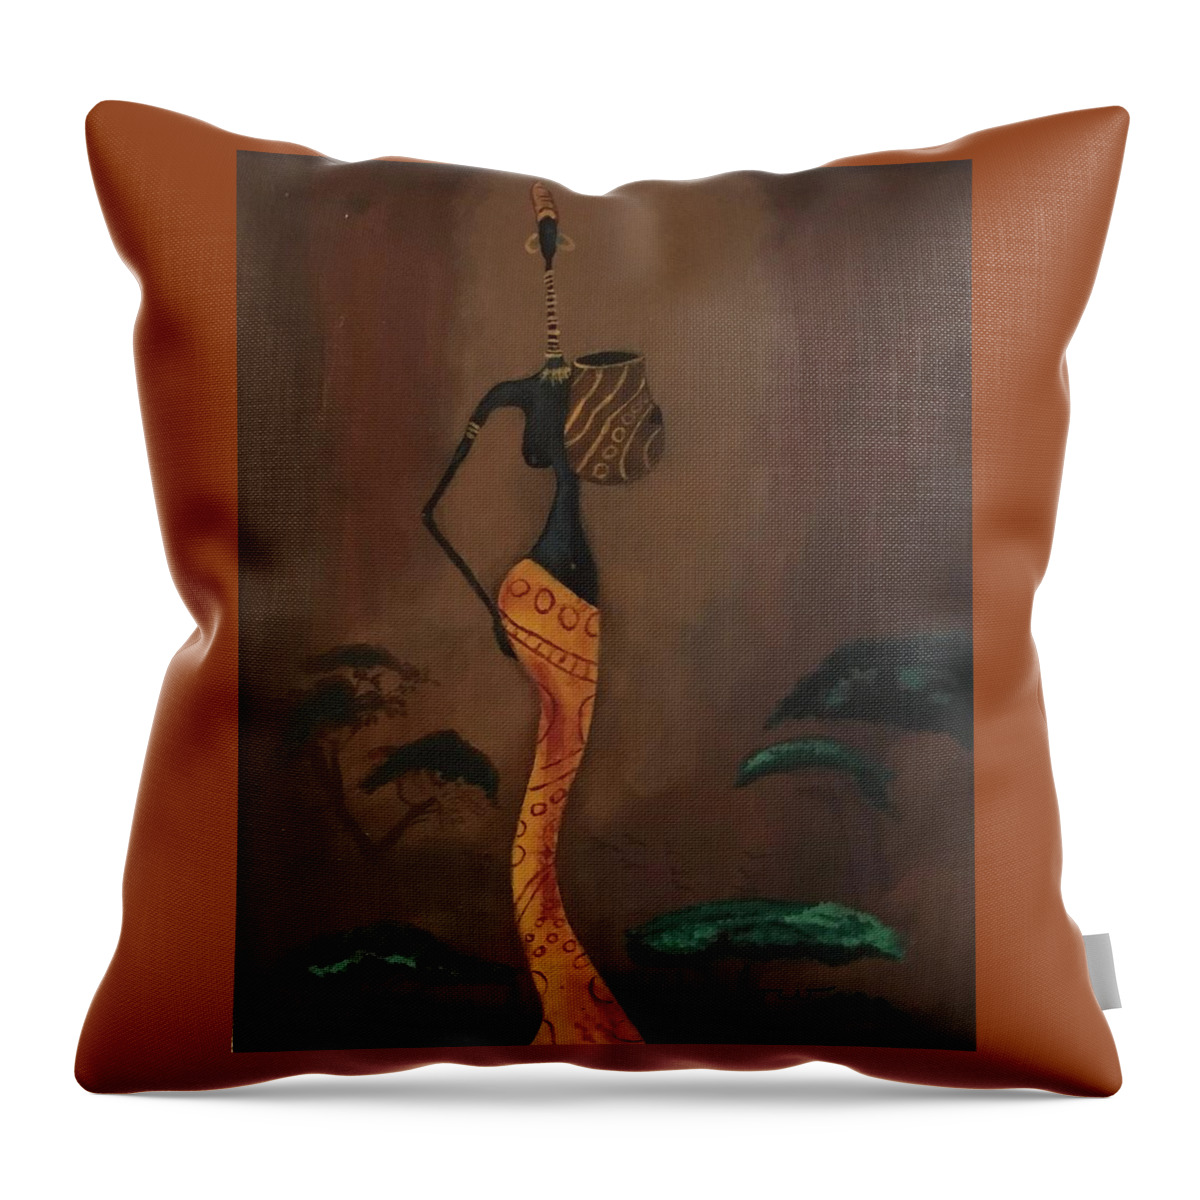 Black Art Throw Pillow featuring the painting Black Beauty by Charles Young